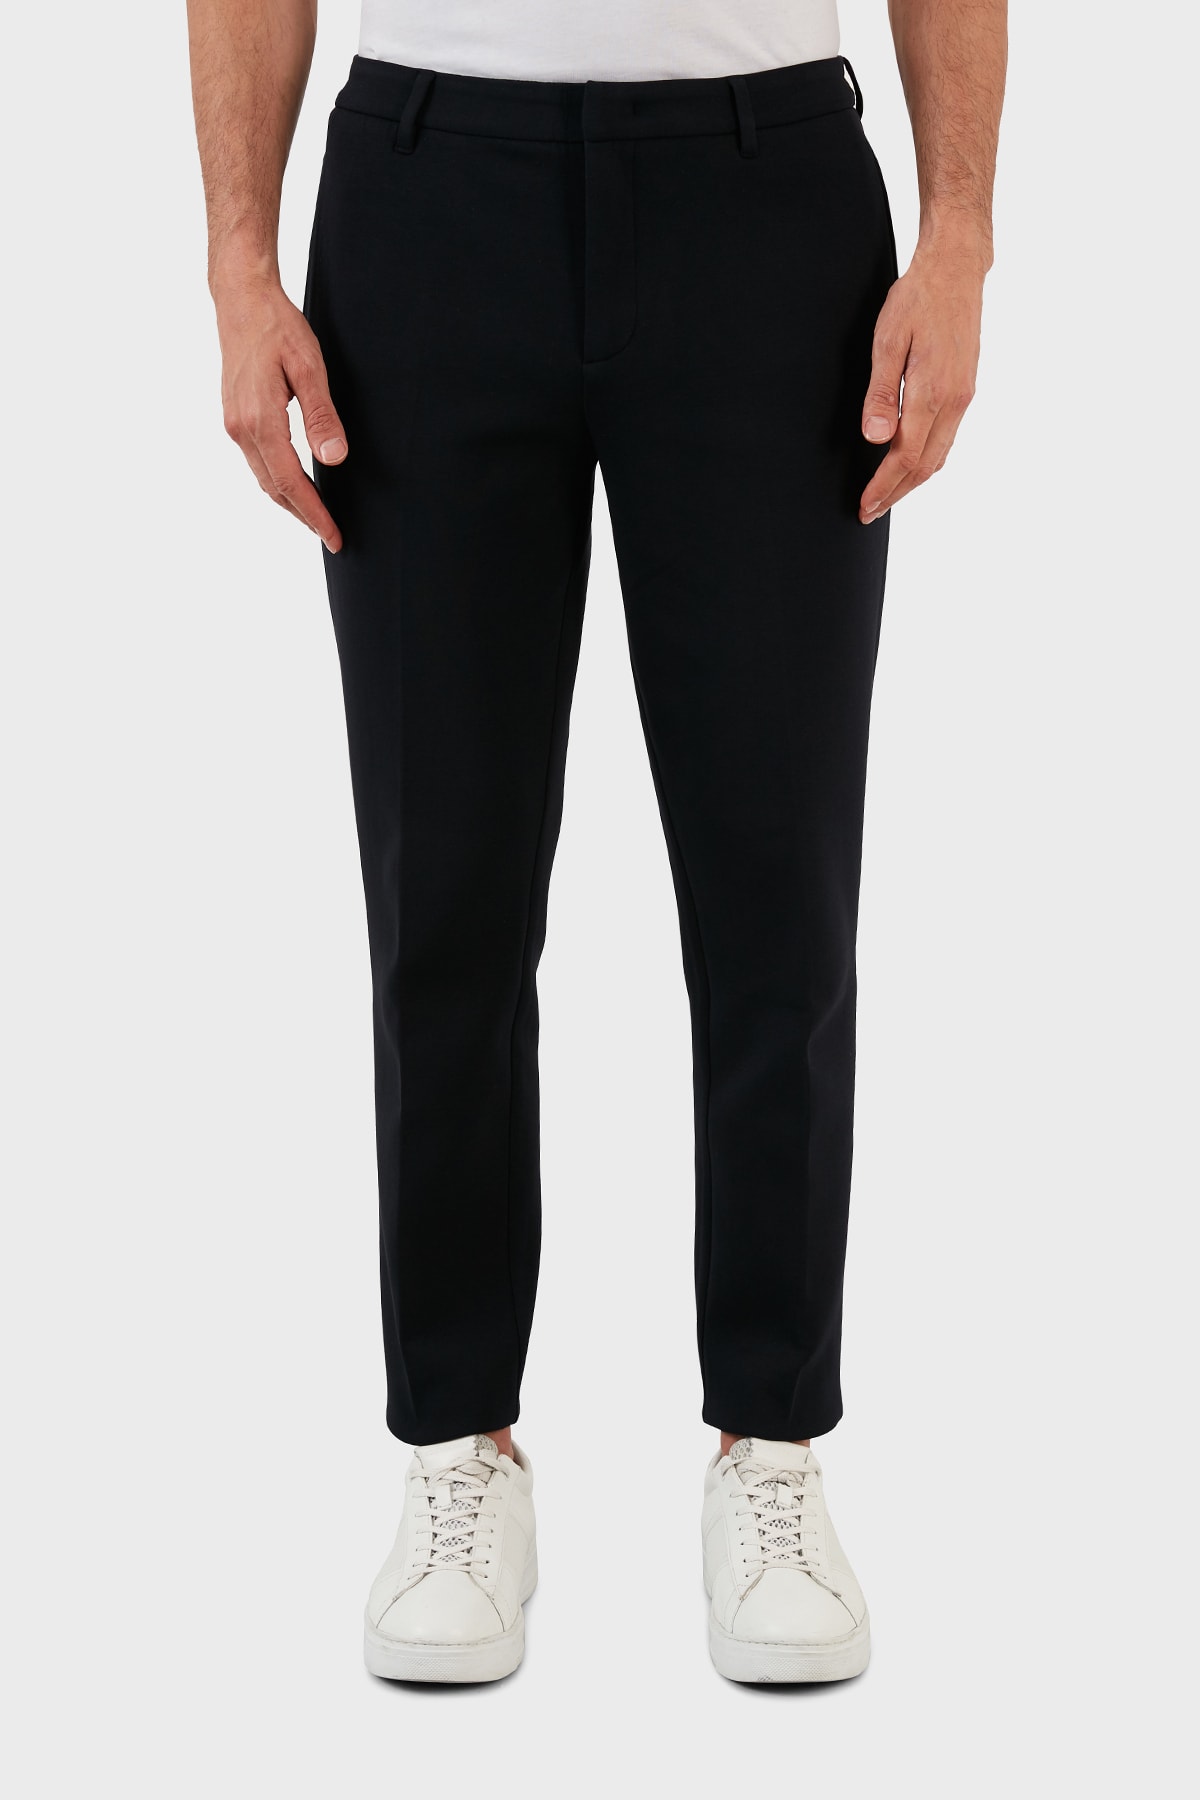 Filippa K Relaxed Terry Wool Trousers Black at CareOfCarl.com-saigonsouth.com.vn